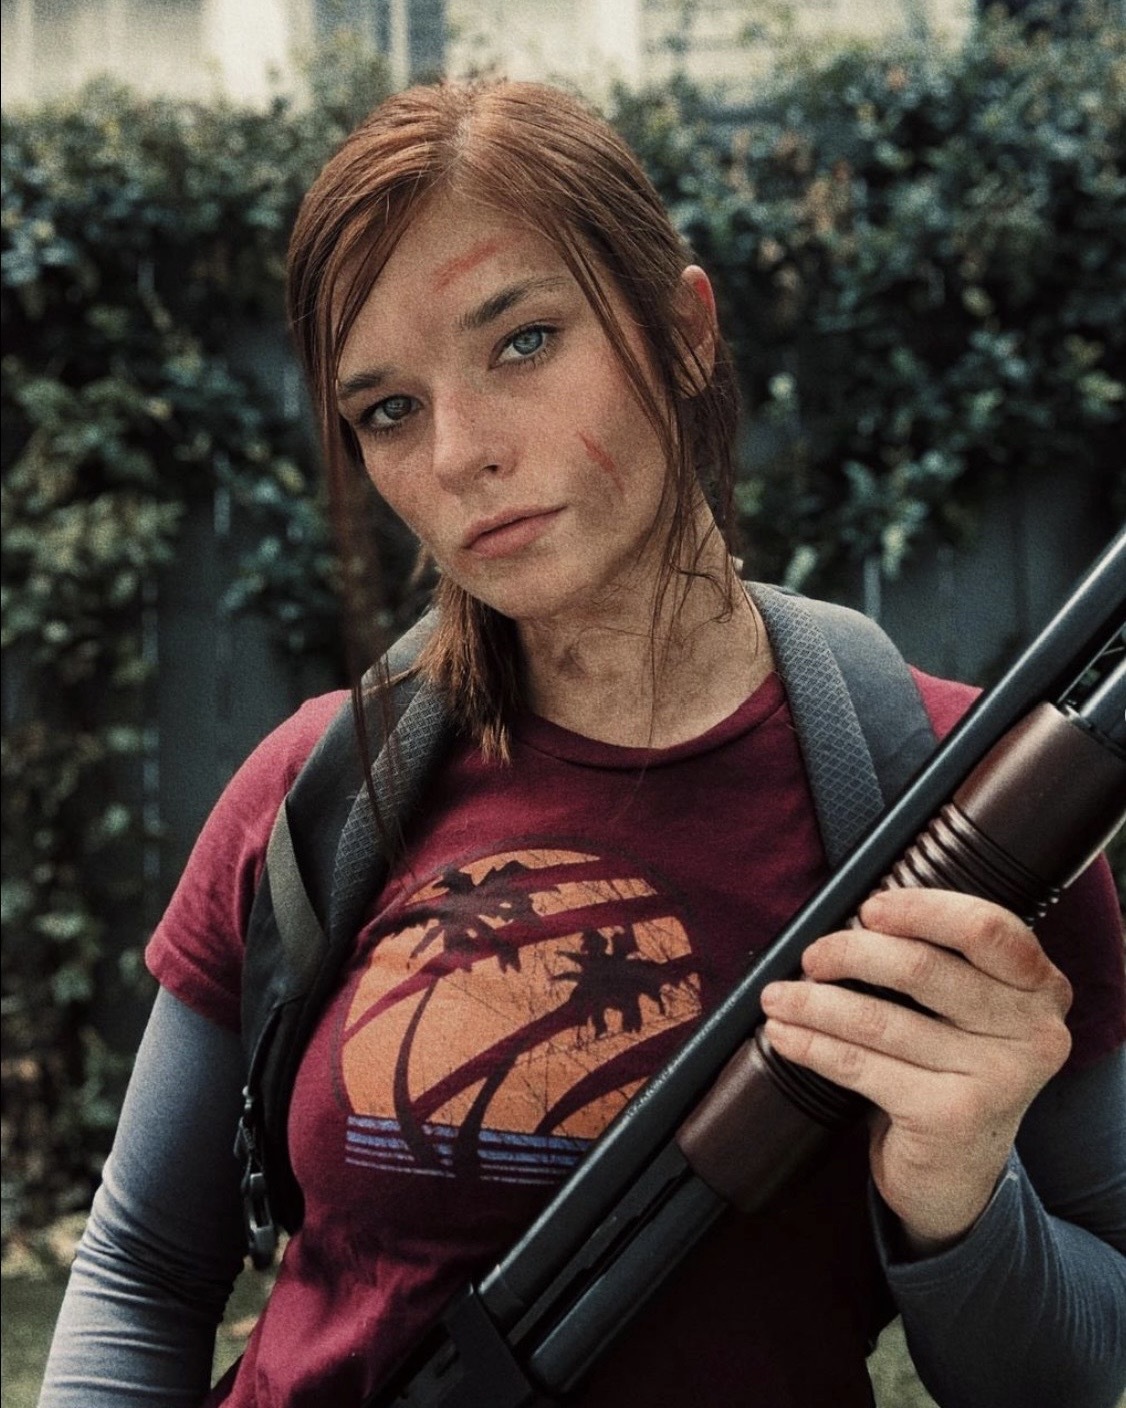 Naughty Dog, LLC - Ellie cosplay from The Last of Us Part II by